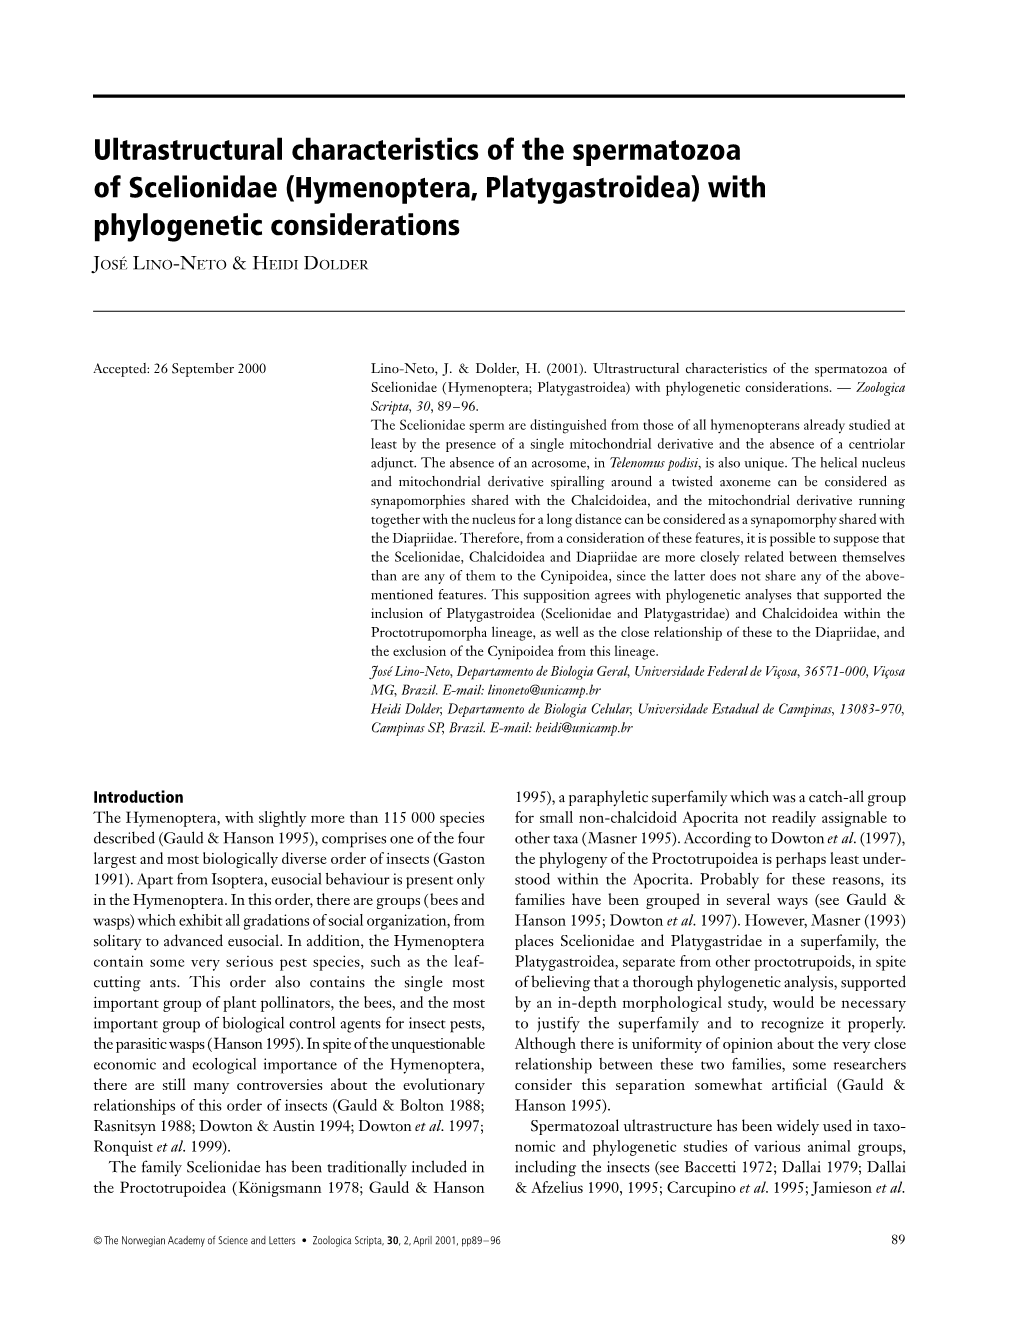 Hymenoptera, Platygastroidea) with Phylogenetic Considerations